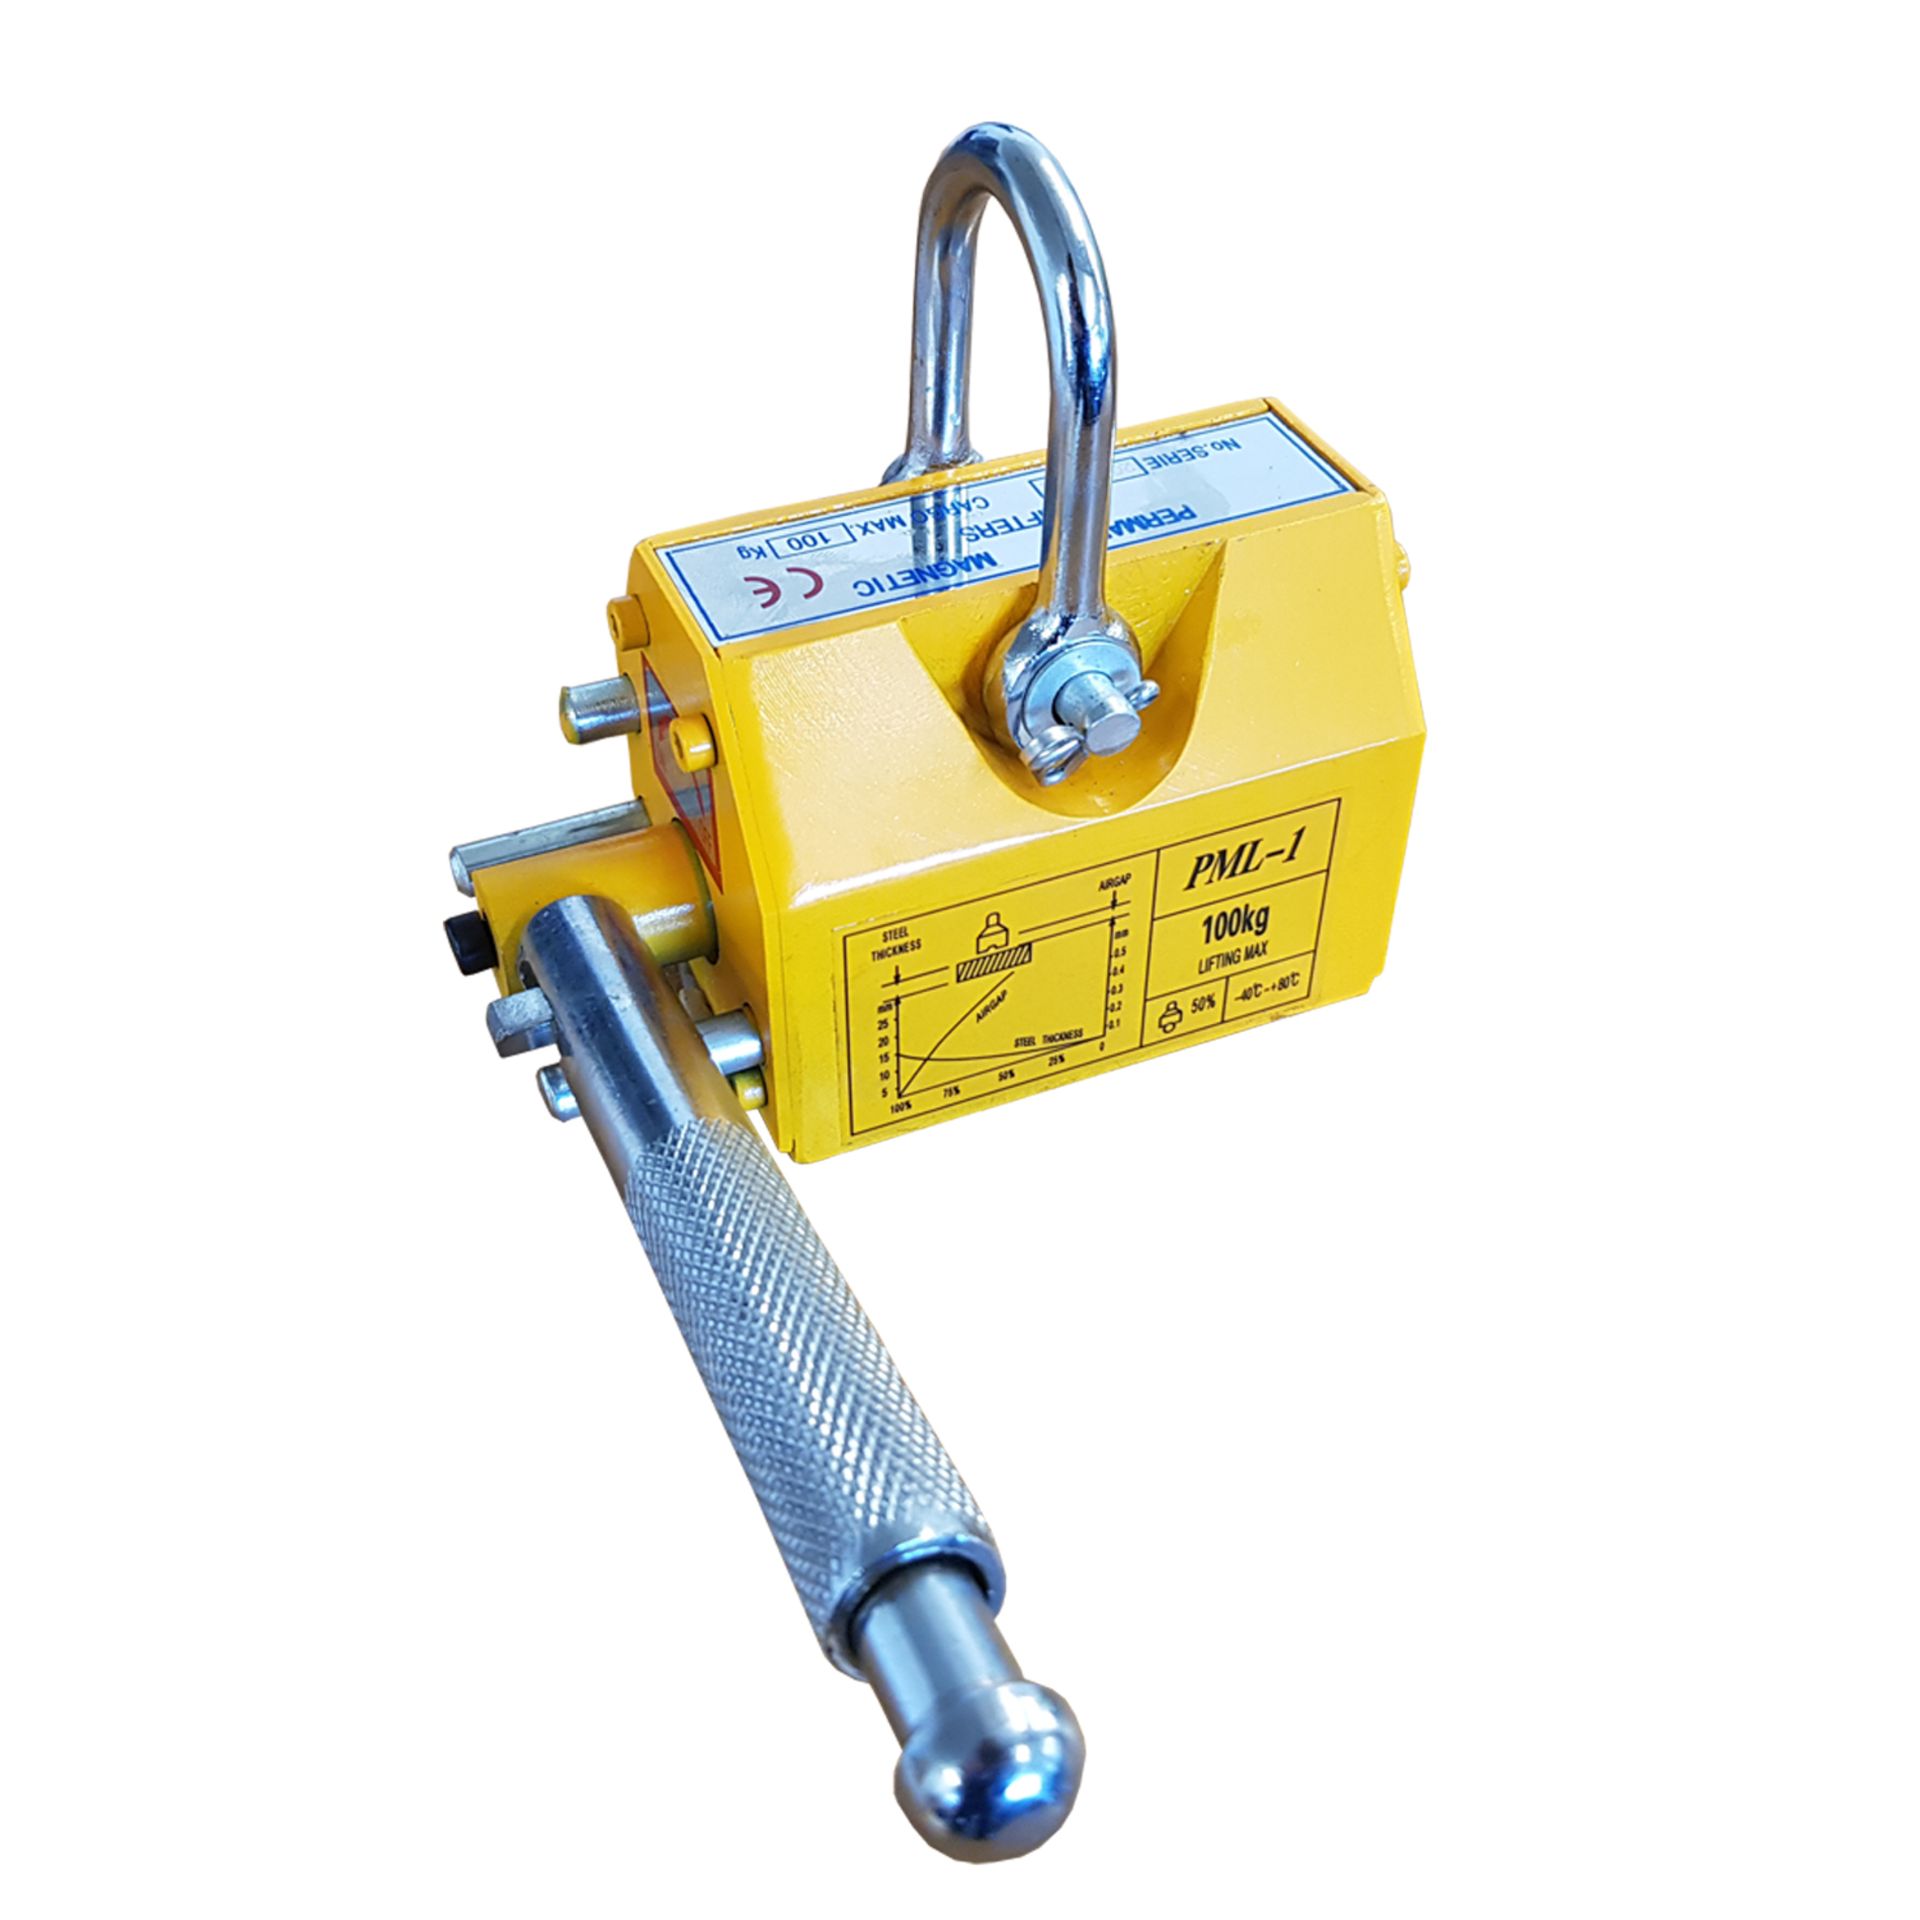 2 x 1000KGS LIFTING MAGNET WITH SHACKLE (ZZDMLM1000)